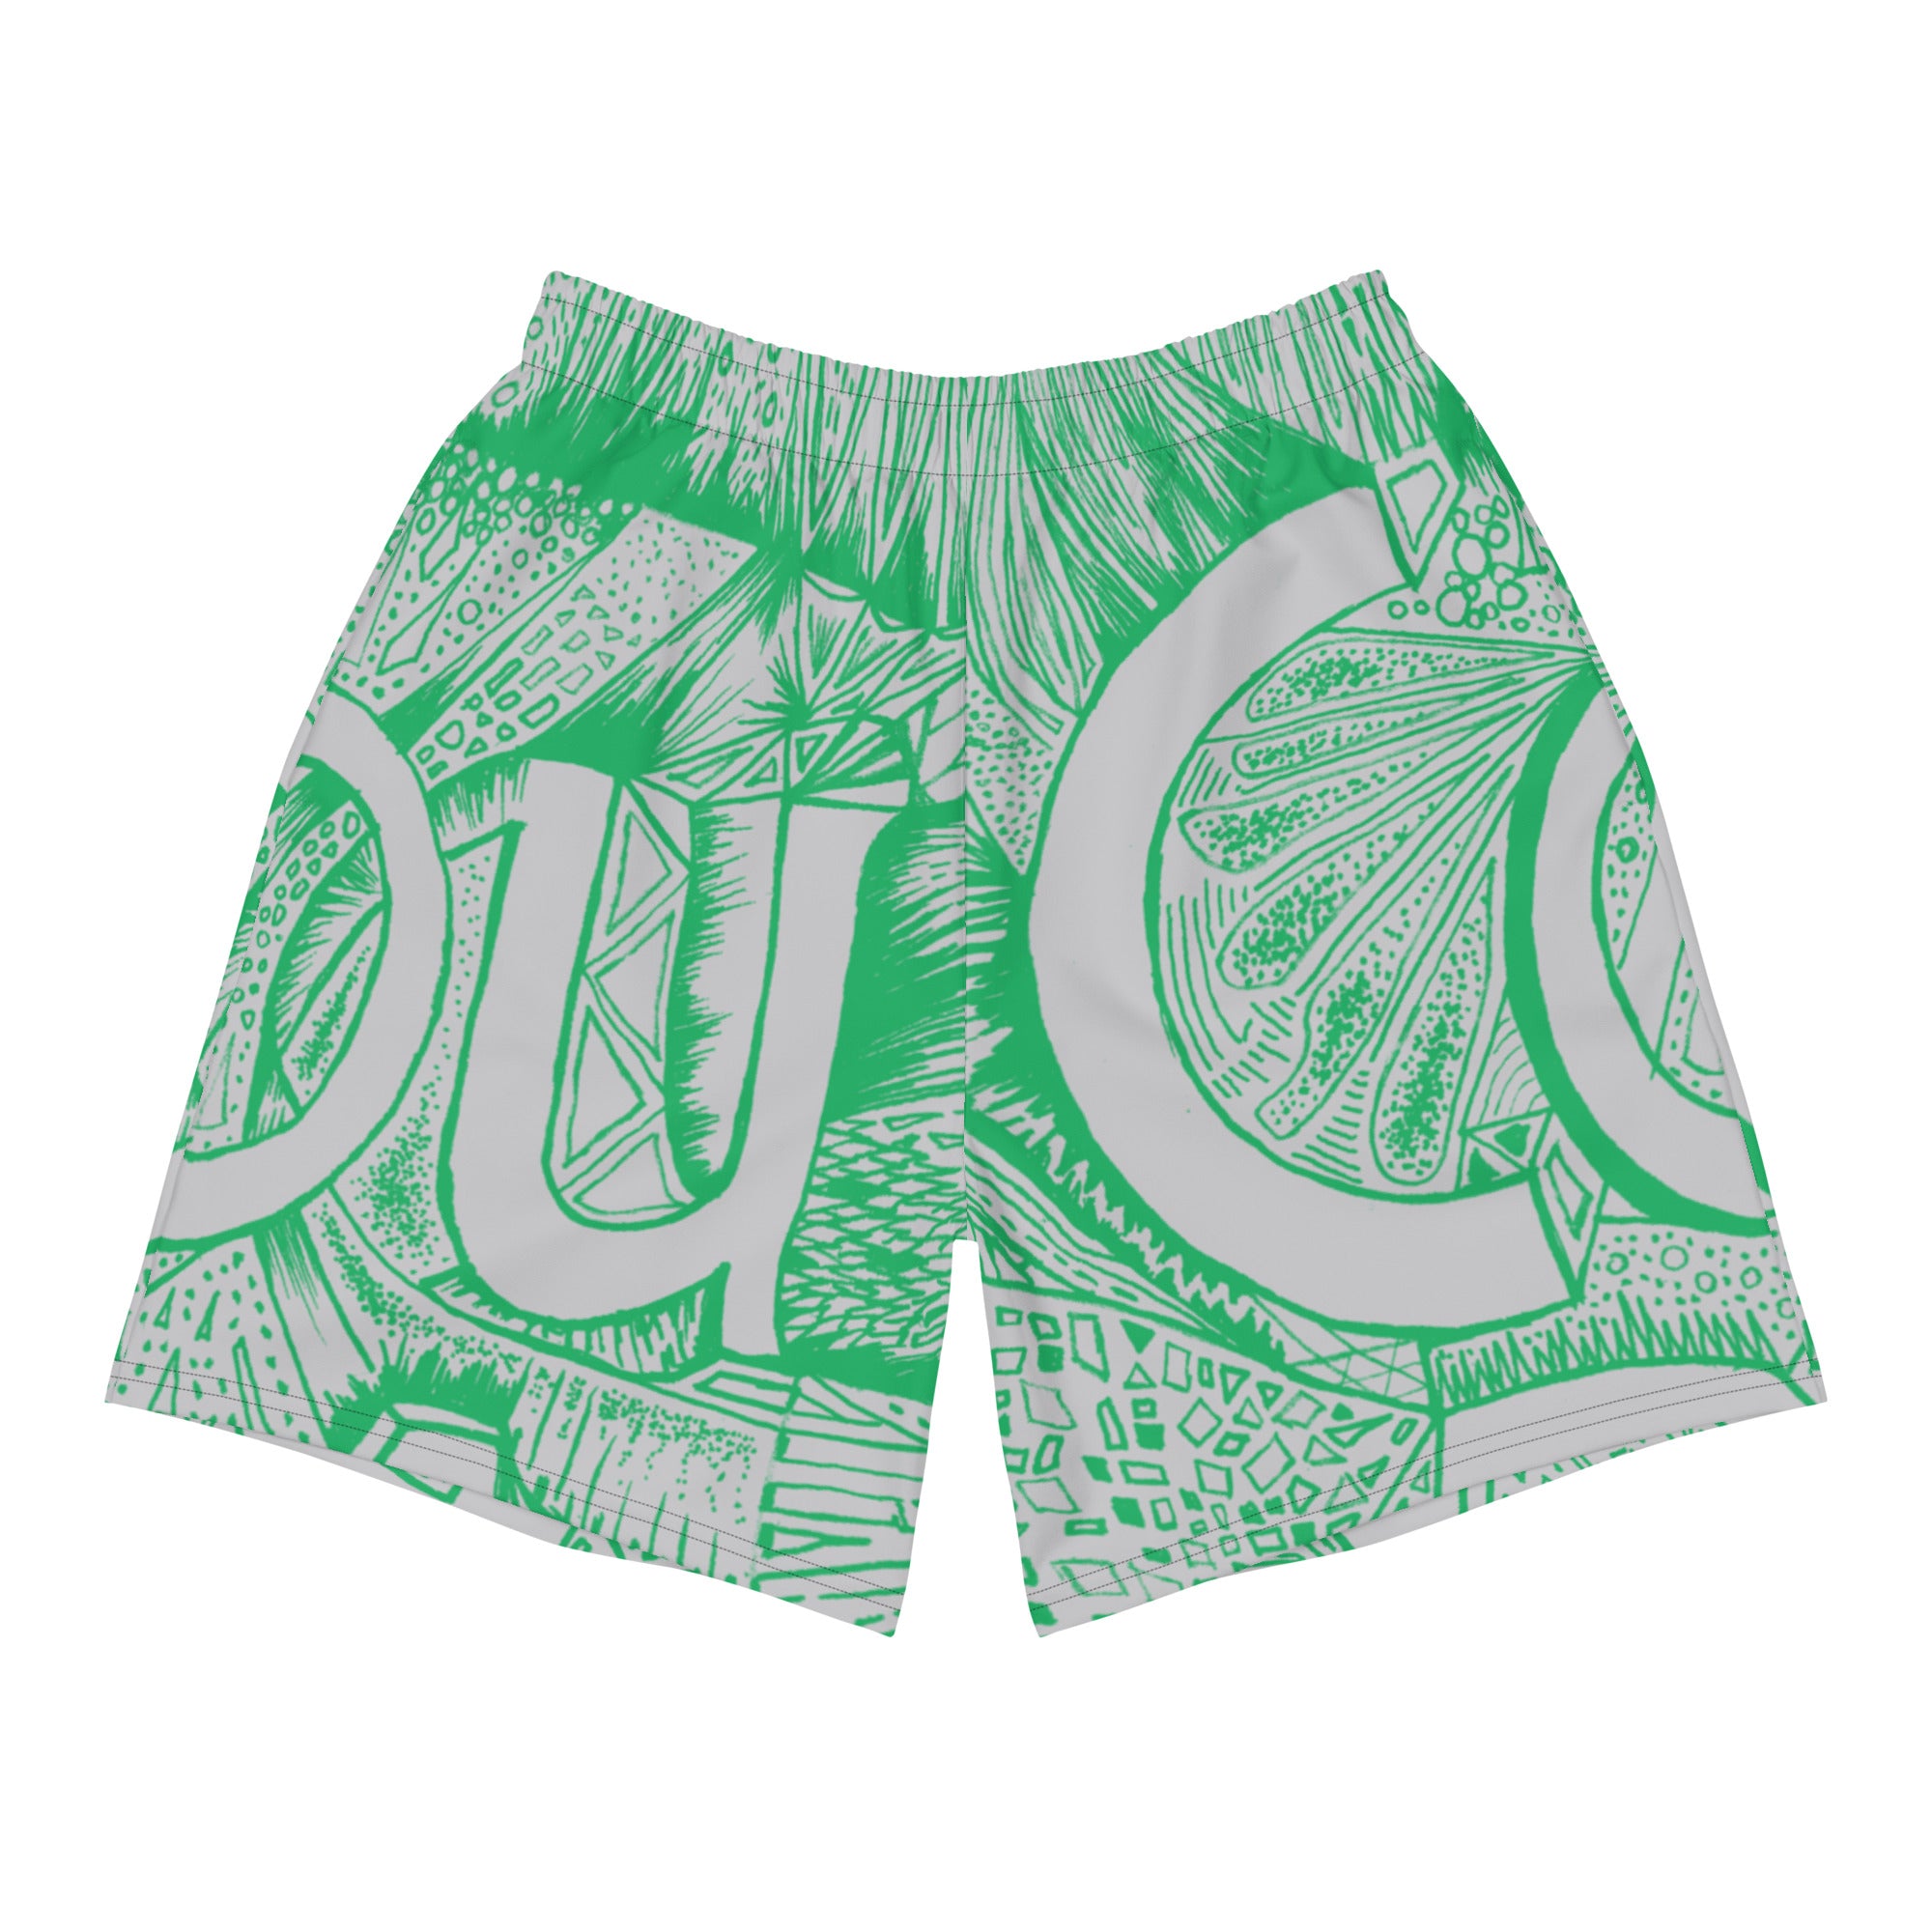 COURAGE Emerald Green - Recycled Athletic Shorts (Unisex )